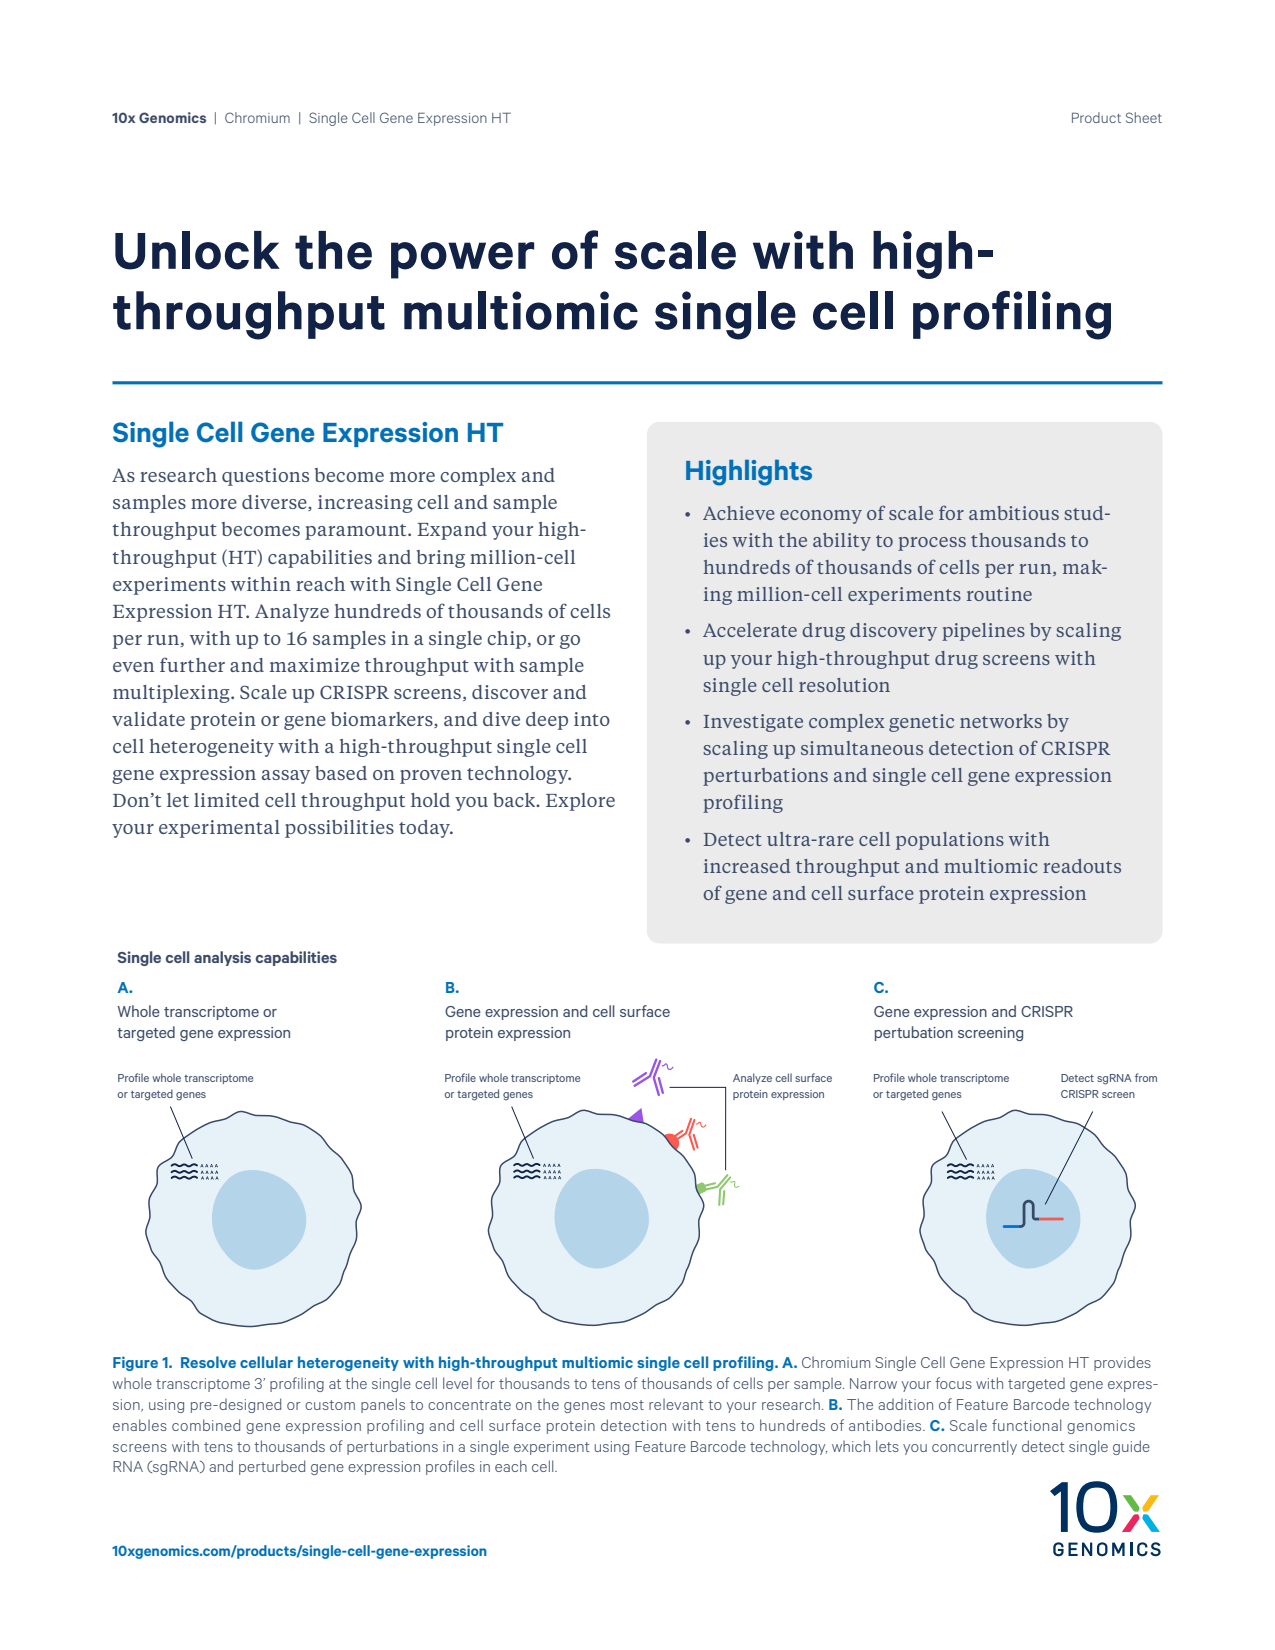 Single Cell Gene Expression HT Product Sheet: Unlock the power of scale with high-throughput multiomic single cell profiling